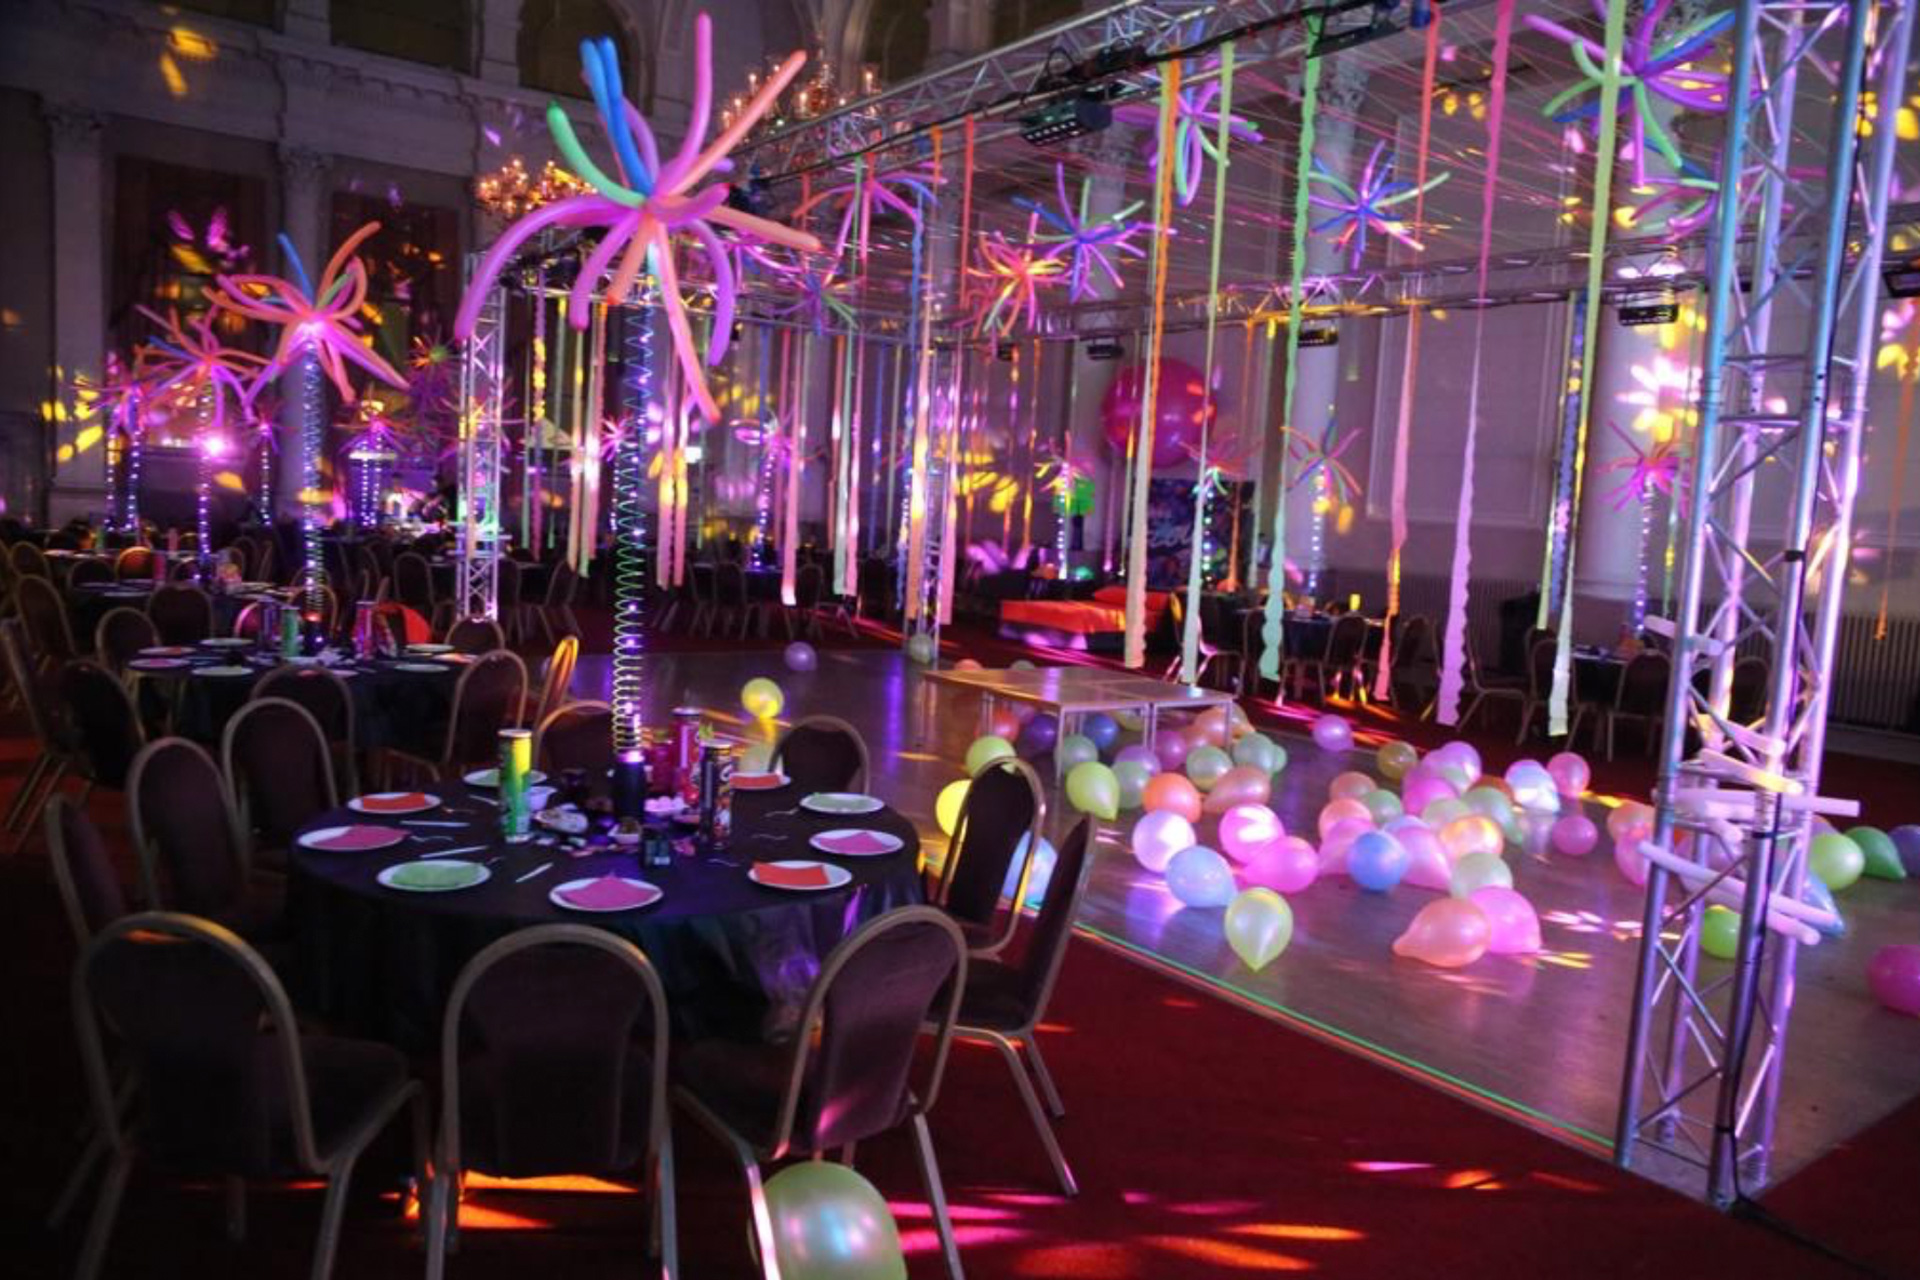 A party room with chairs, balloons and lights.